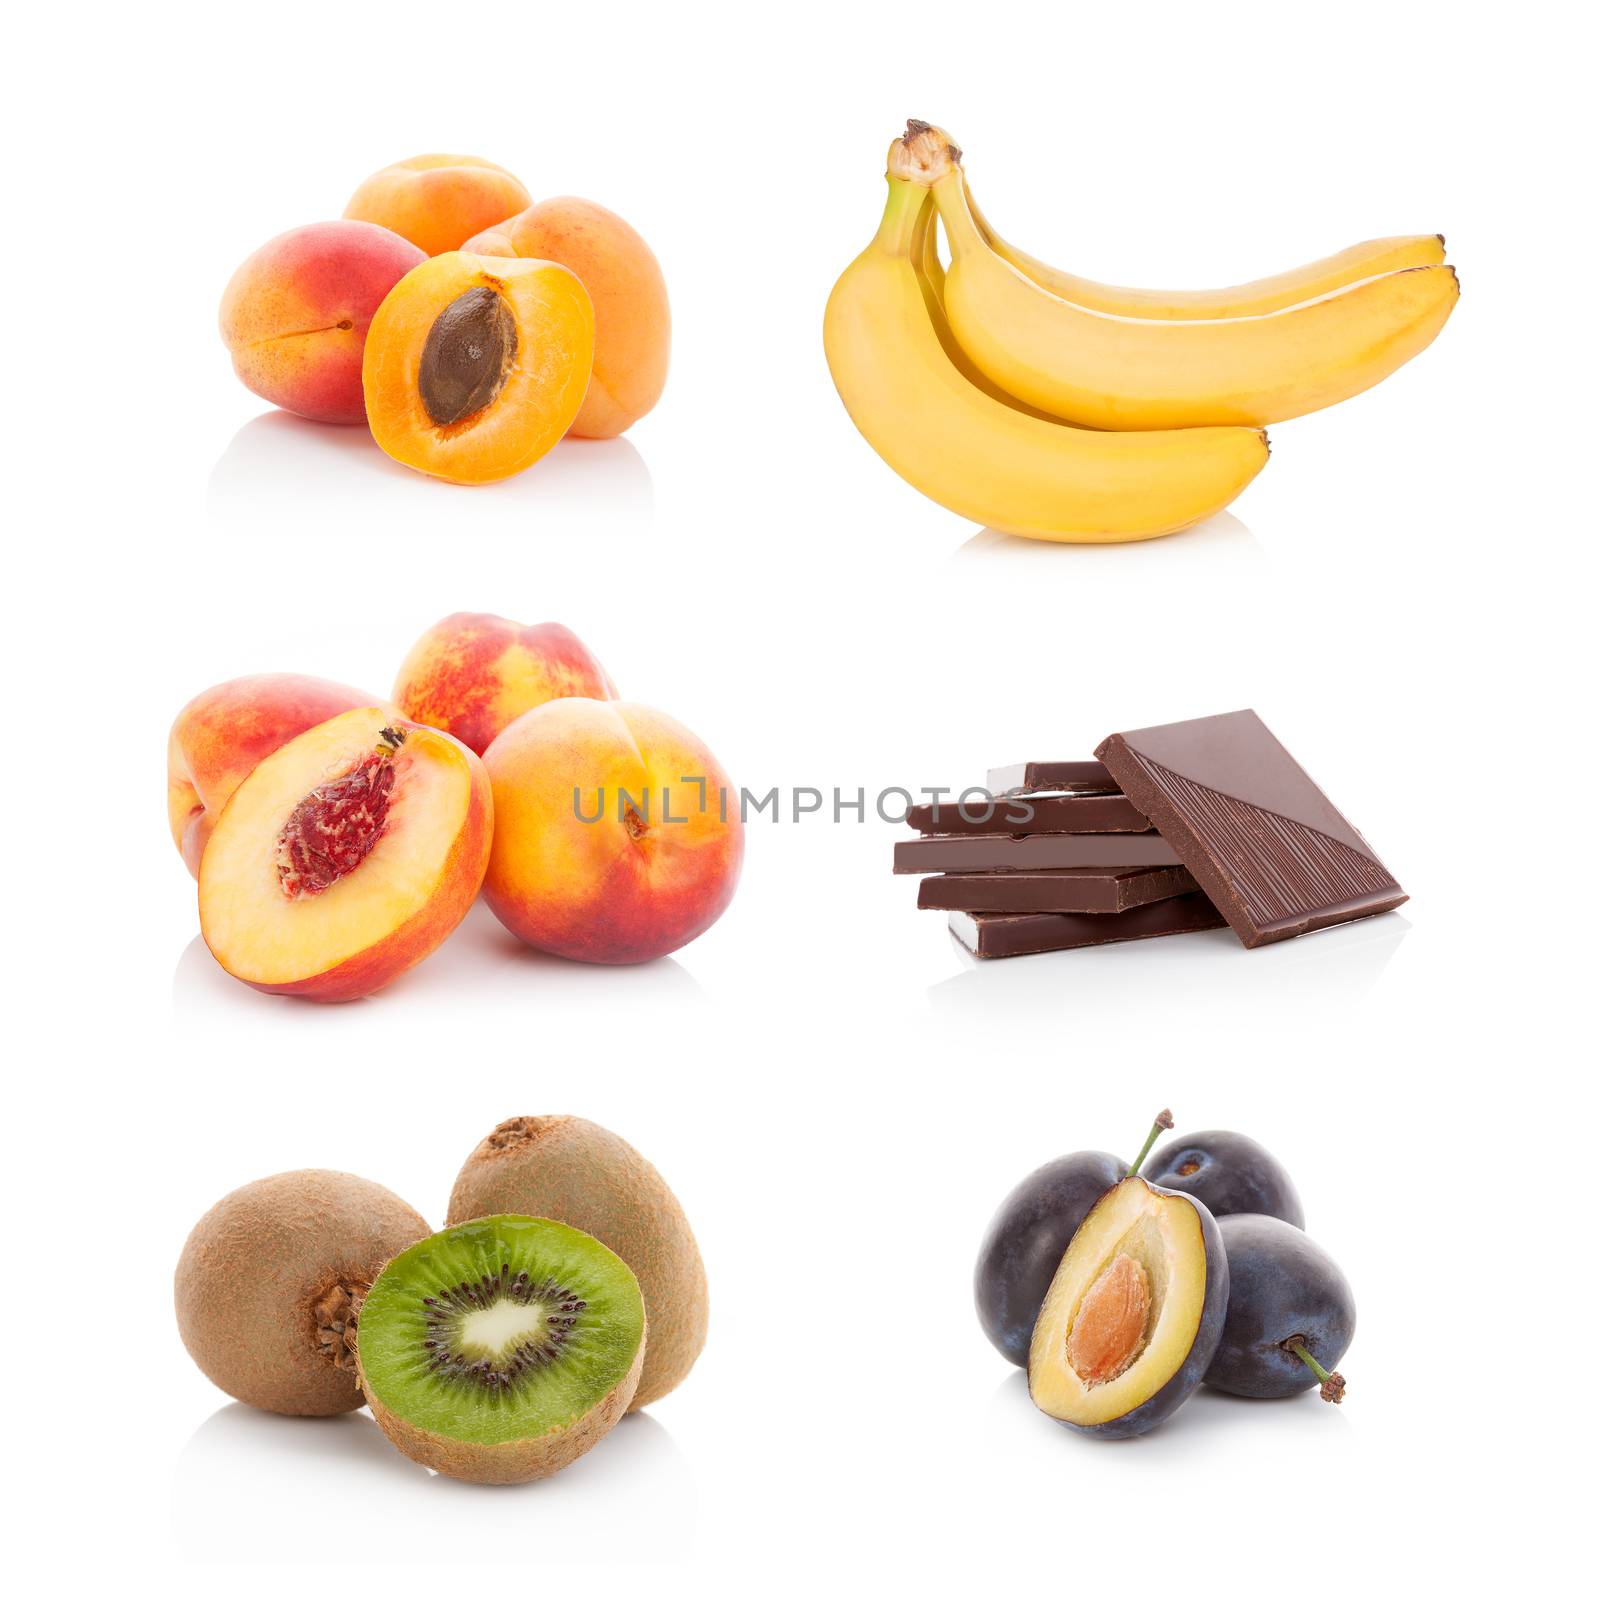 Ripe fresh fruit collection by eskymaks